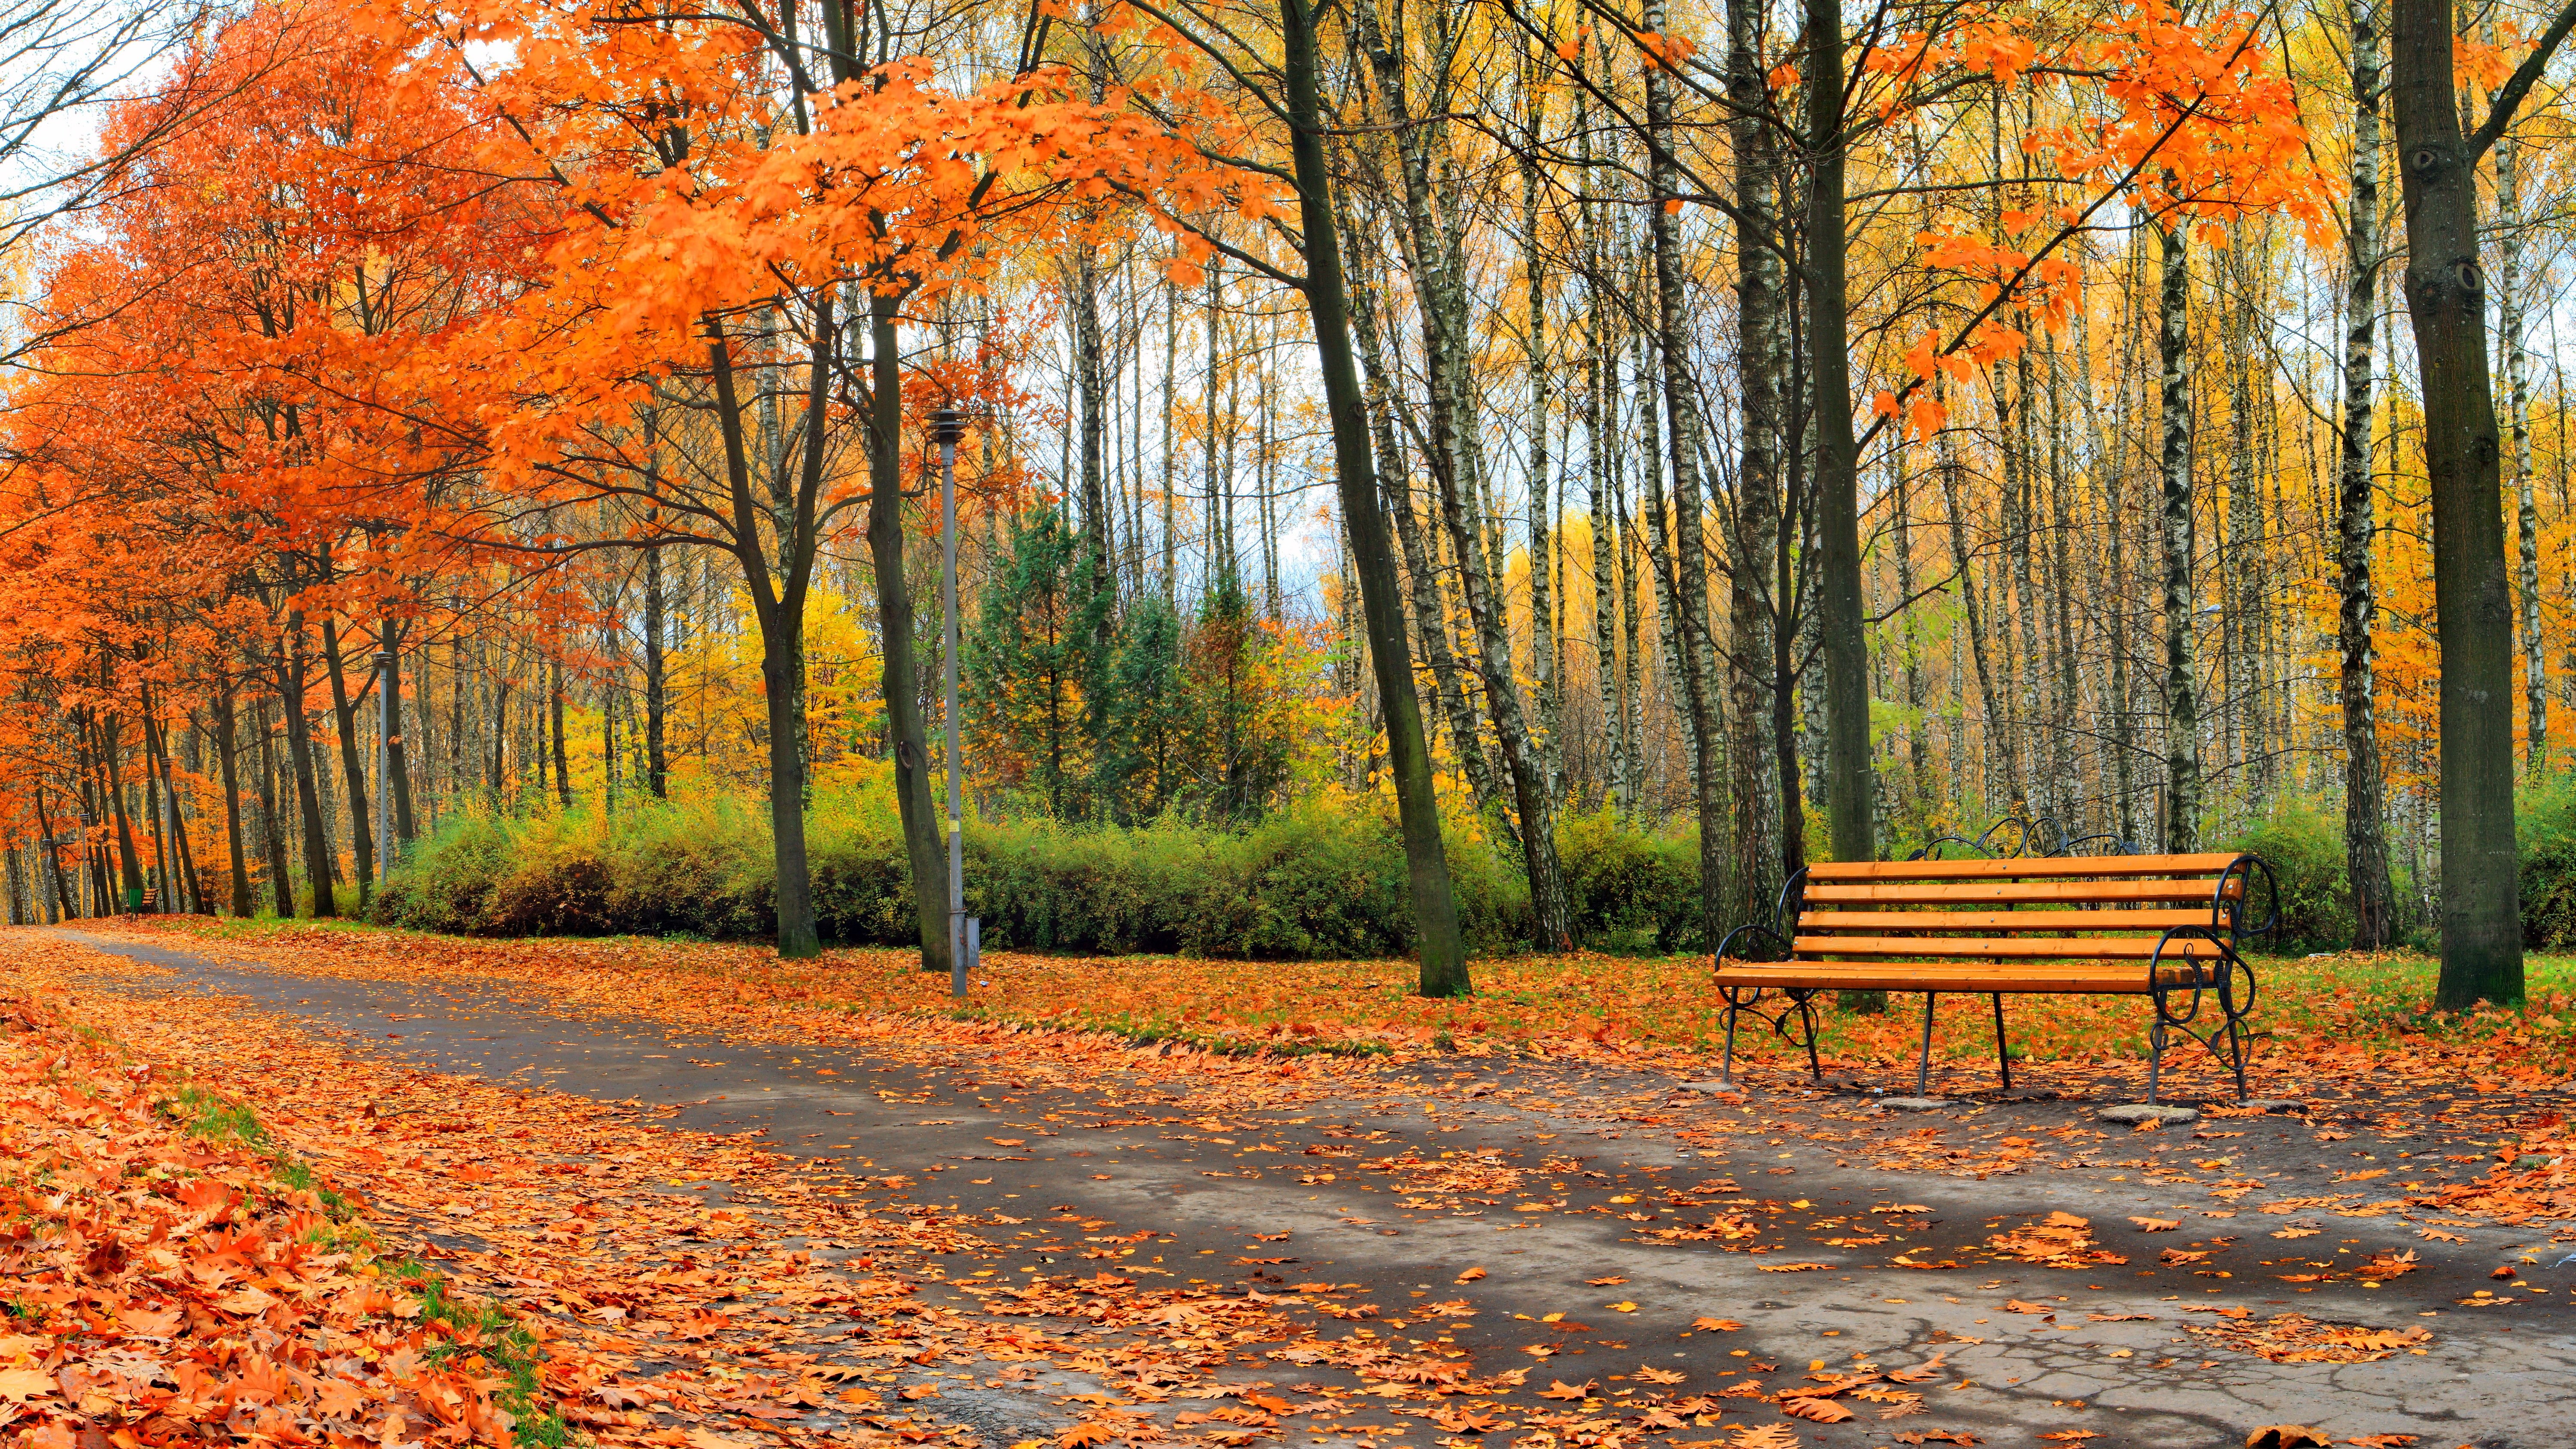 autumn, Fall, Landscape, Nature, Tree, Forest, Leaf, Leaves, Path, Trail, Bench Wallpaper